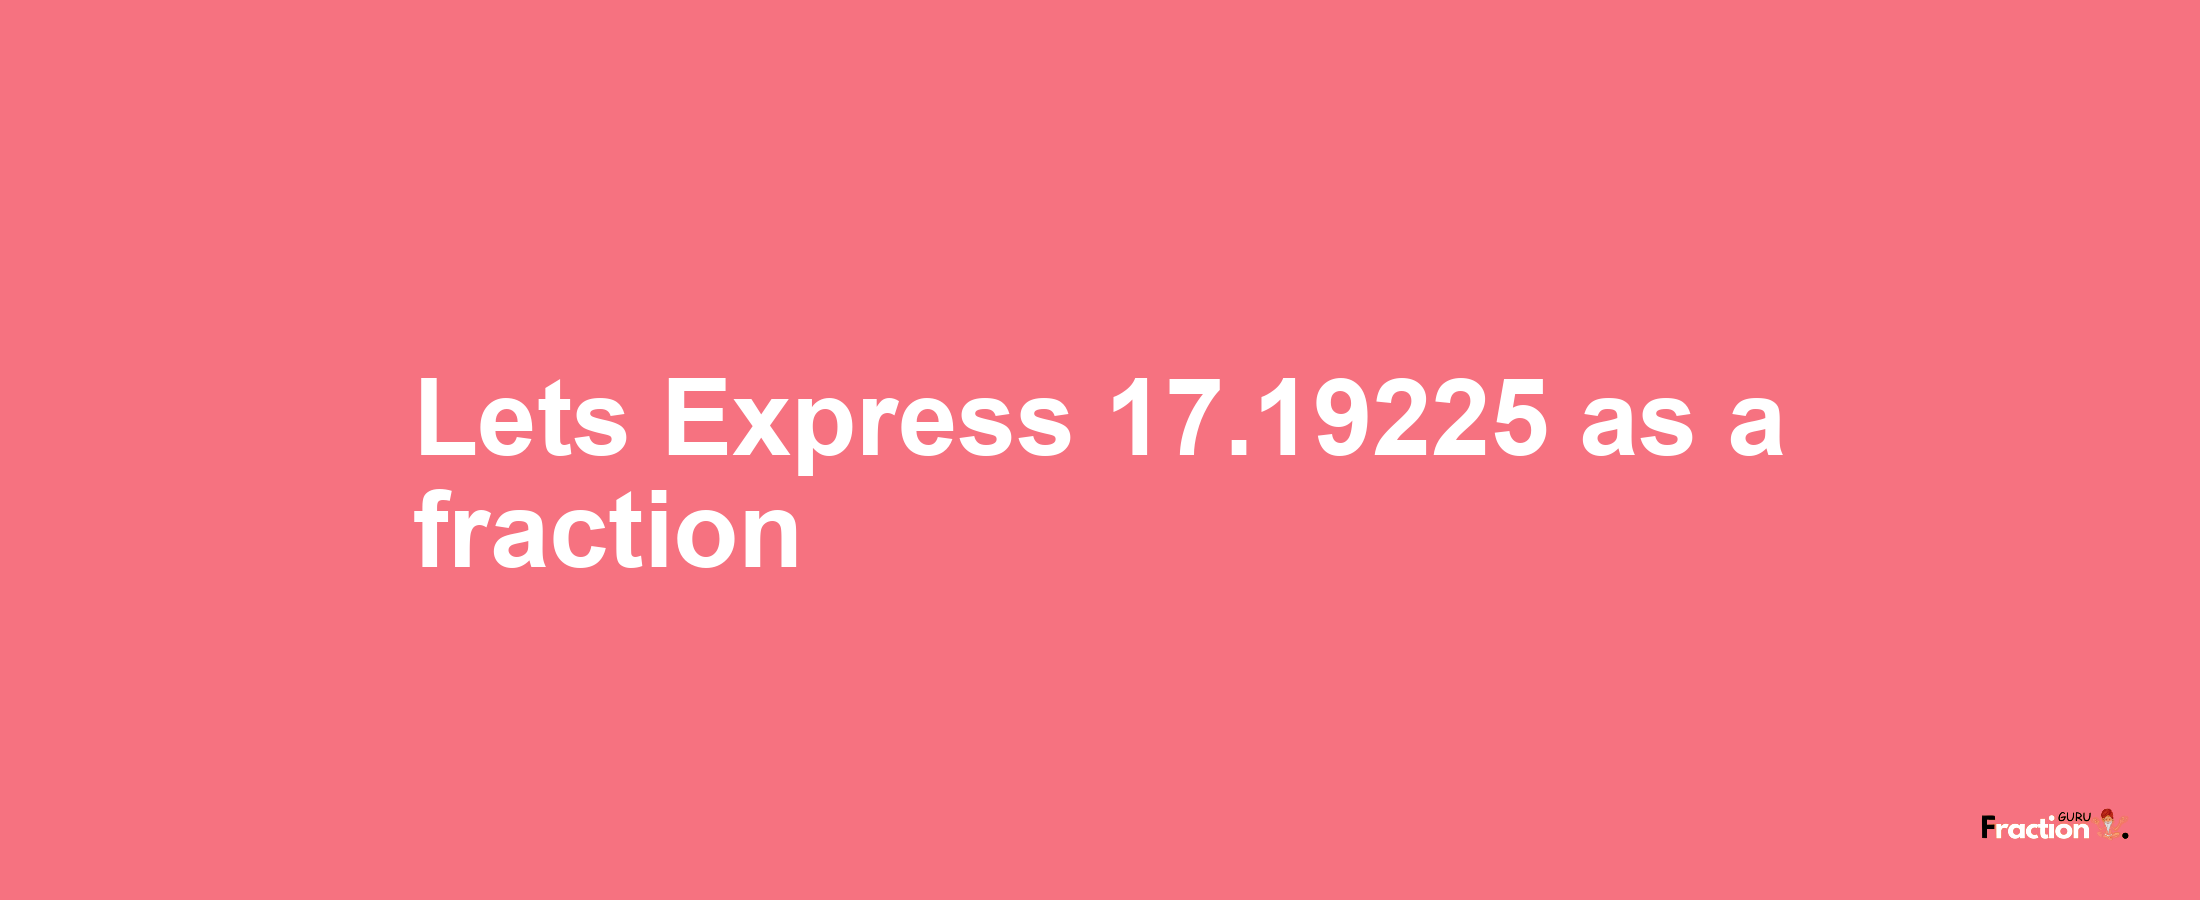 Lets Express 17.19225 as afraction